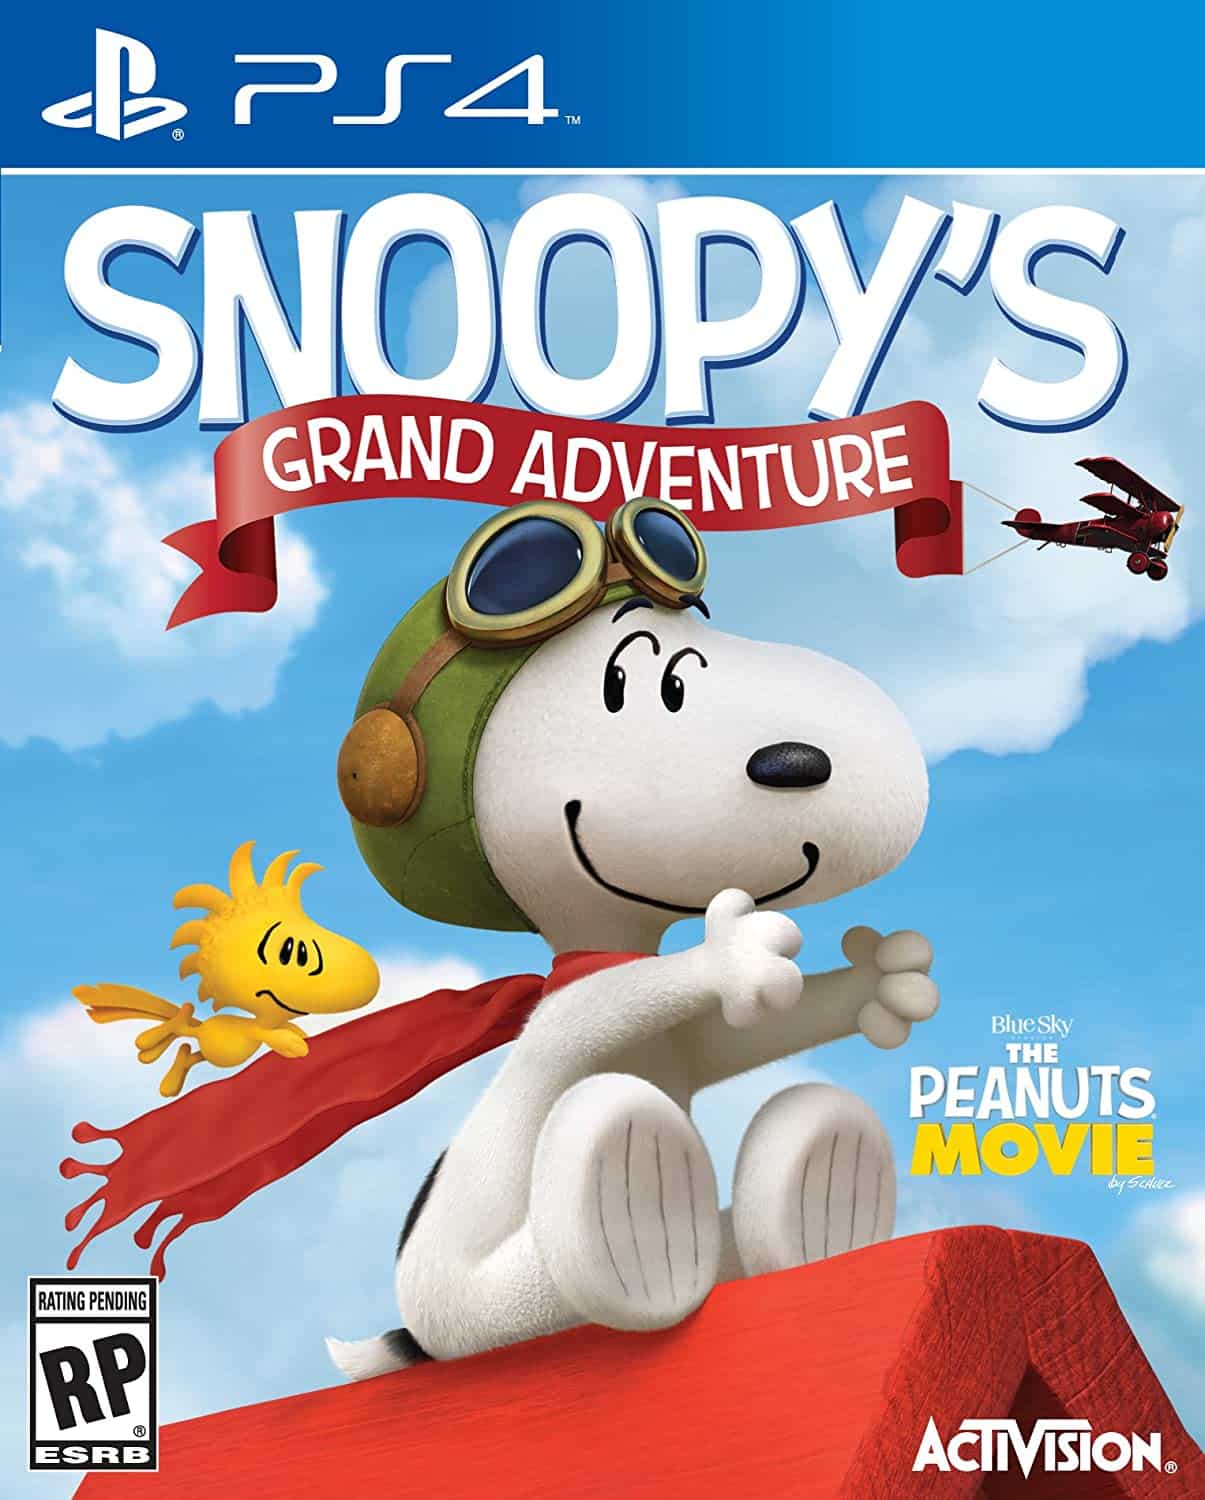 The Peanuts Movie: Snoopy’s Grand Adventure player count stats